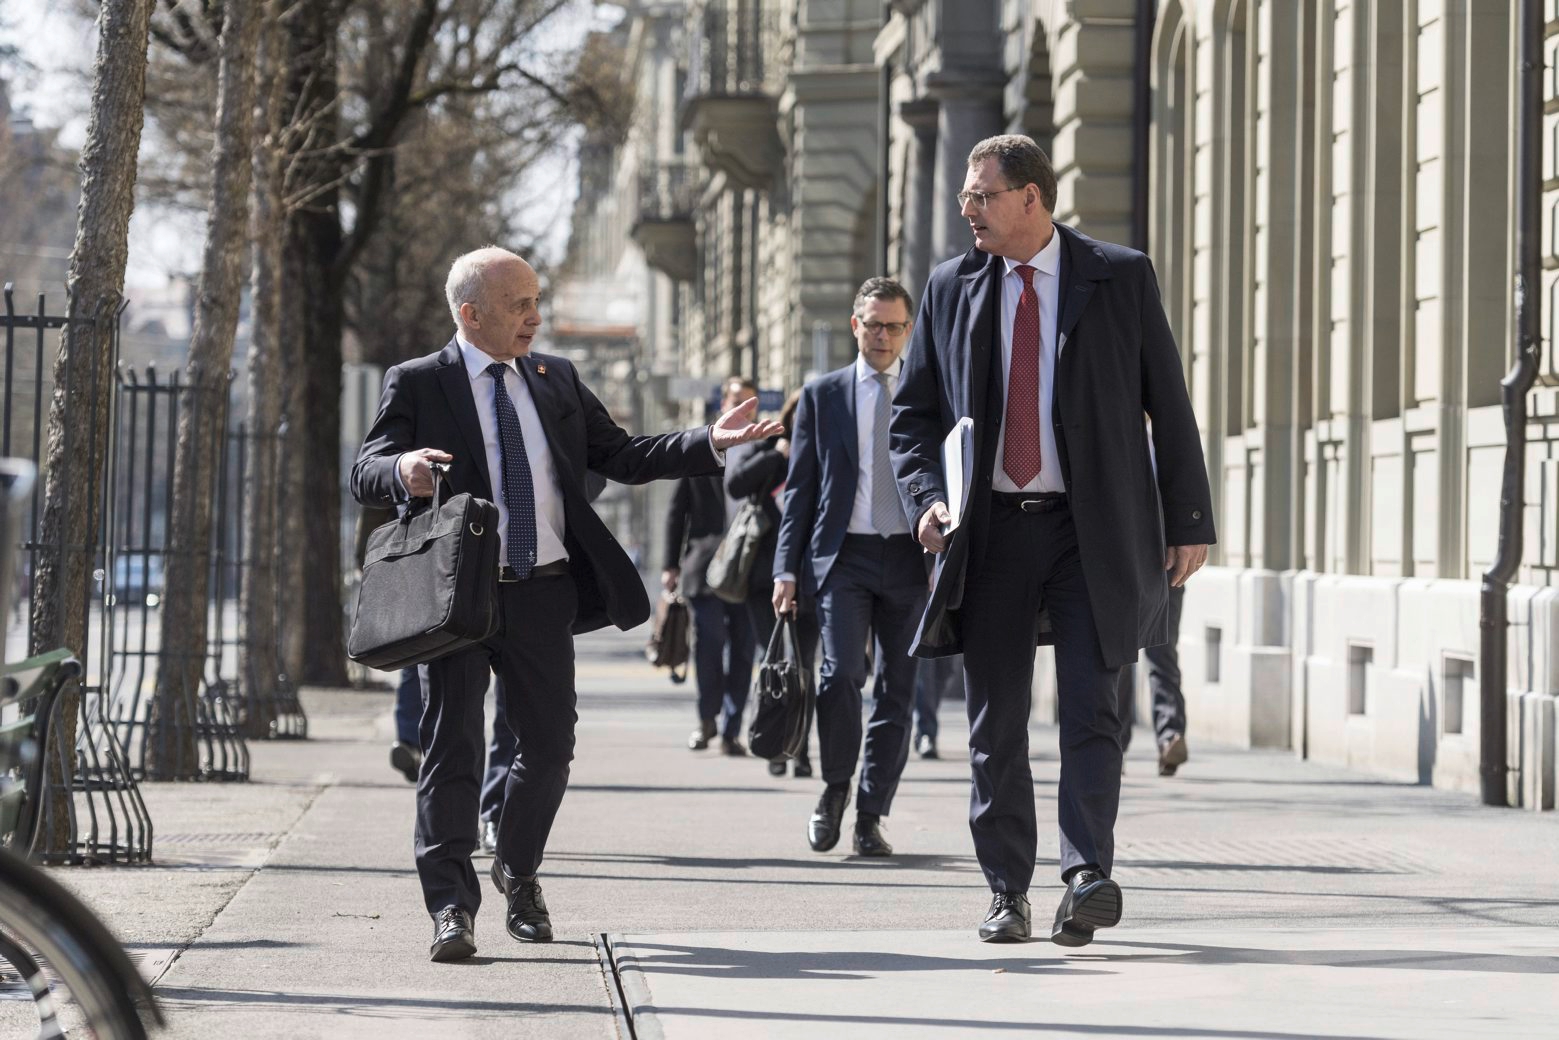 Swiss Federal councillor and finance minister Ueli Maurer, left, and Thomas Jordan, chairman of the governing board of the Swiss National Bank, walk to a media brief about the latest economic measures during the Covid-19 Coronavirus pandemic, on Wednesday, March 25, 2020 in Bern, Switzerland. (KEYSTONE/Alessandro della Valle) SWITZERLAND GOVERNMENT CORONAVIRUS